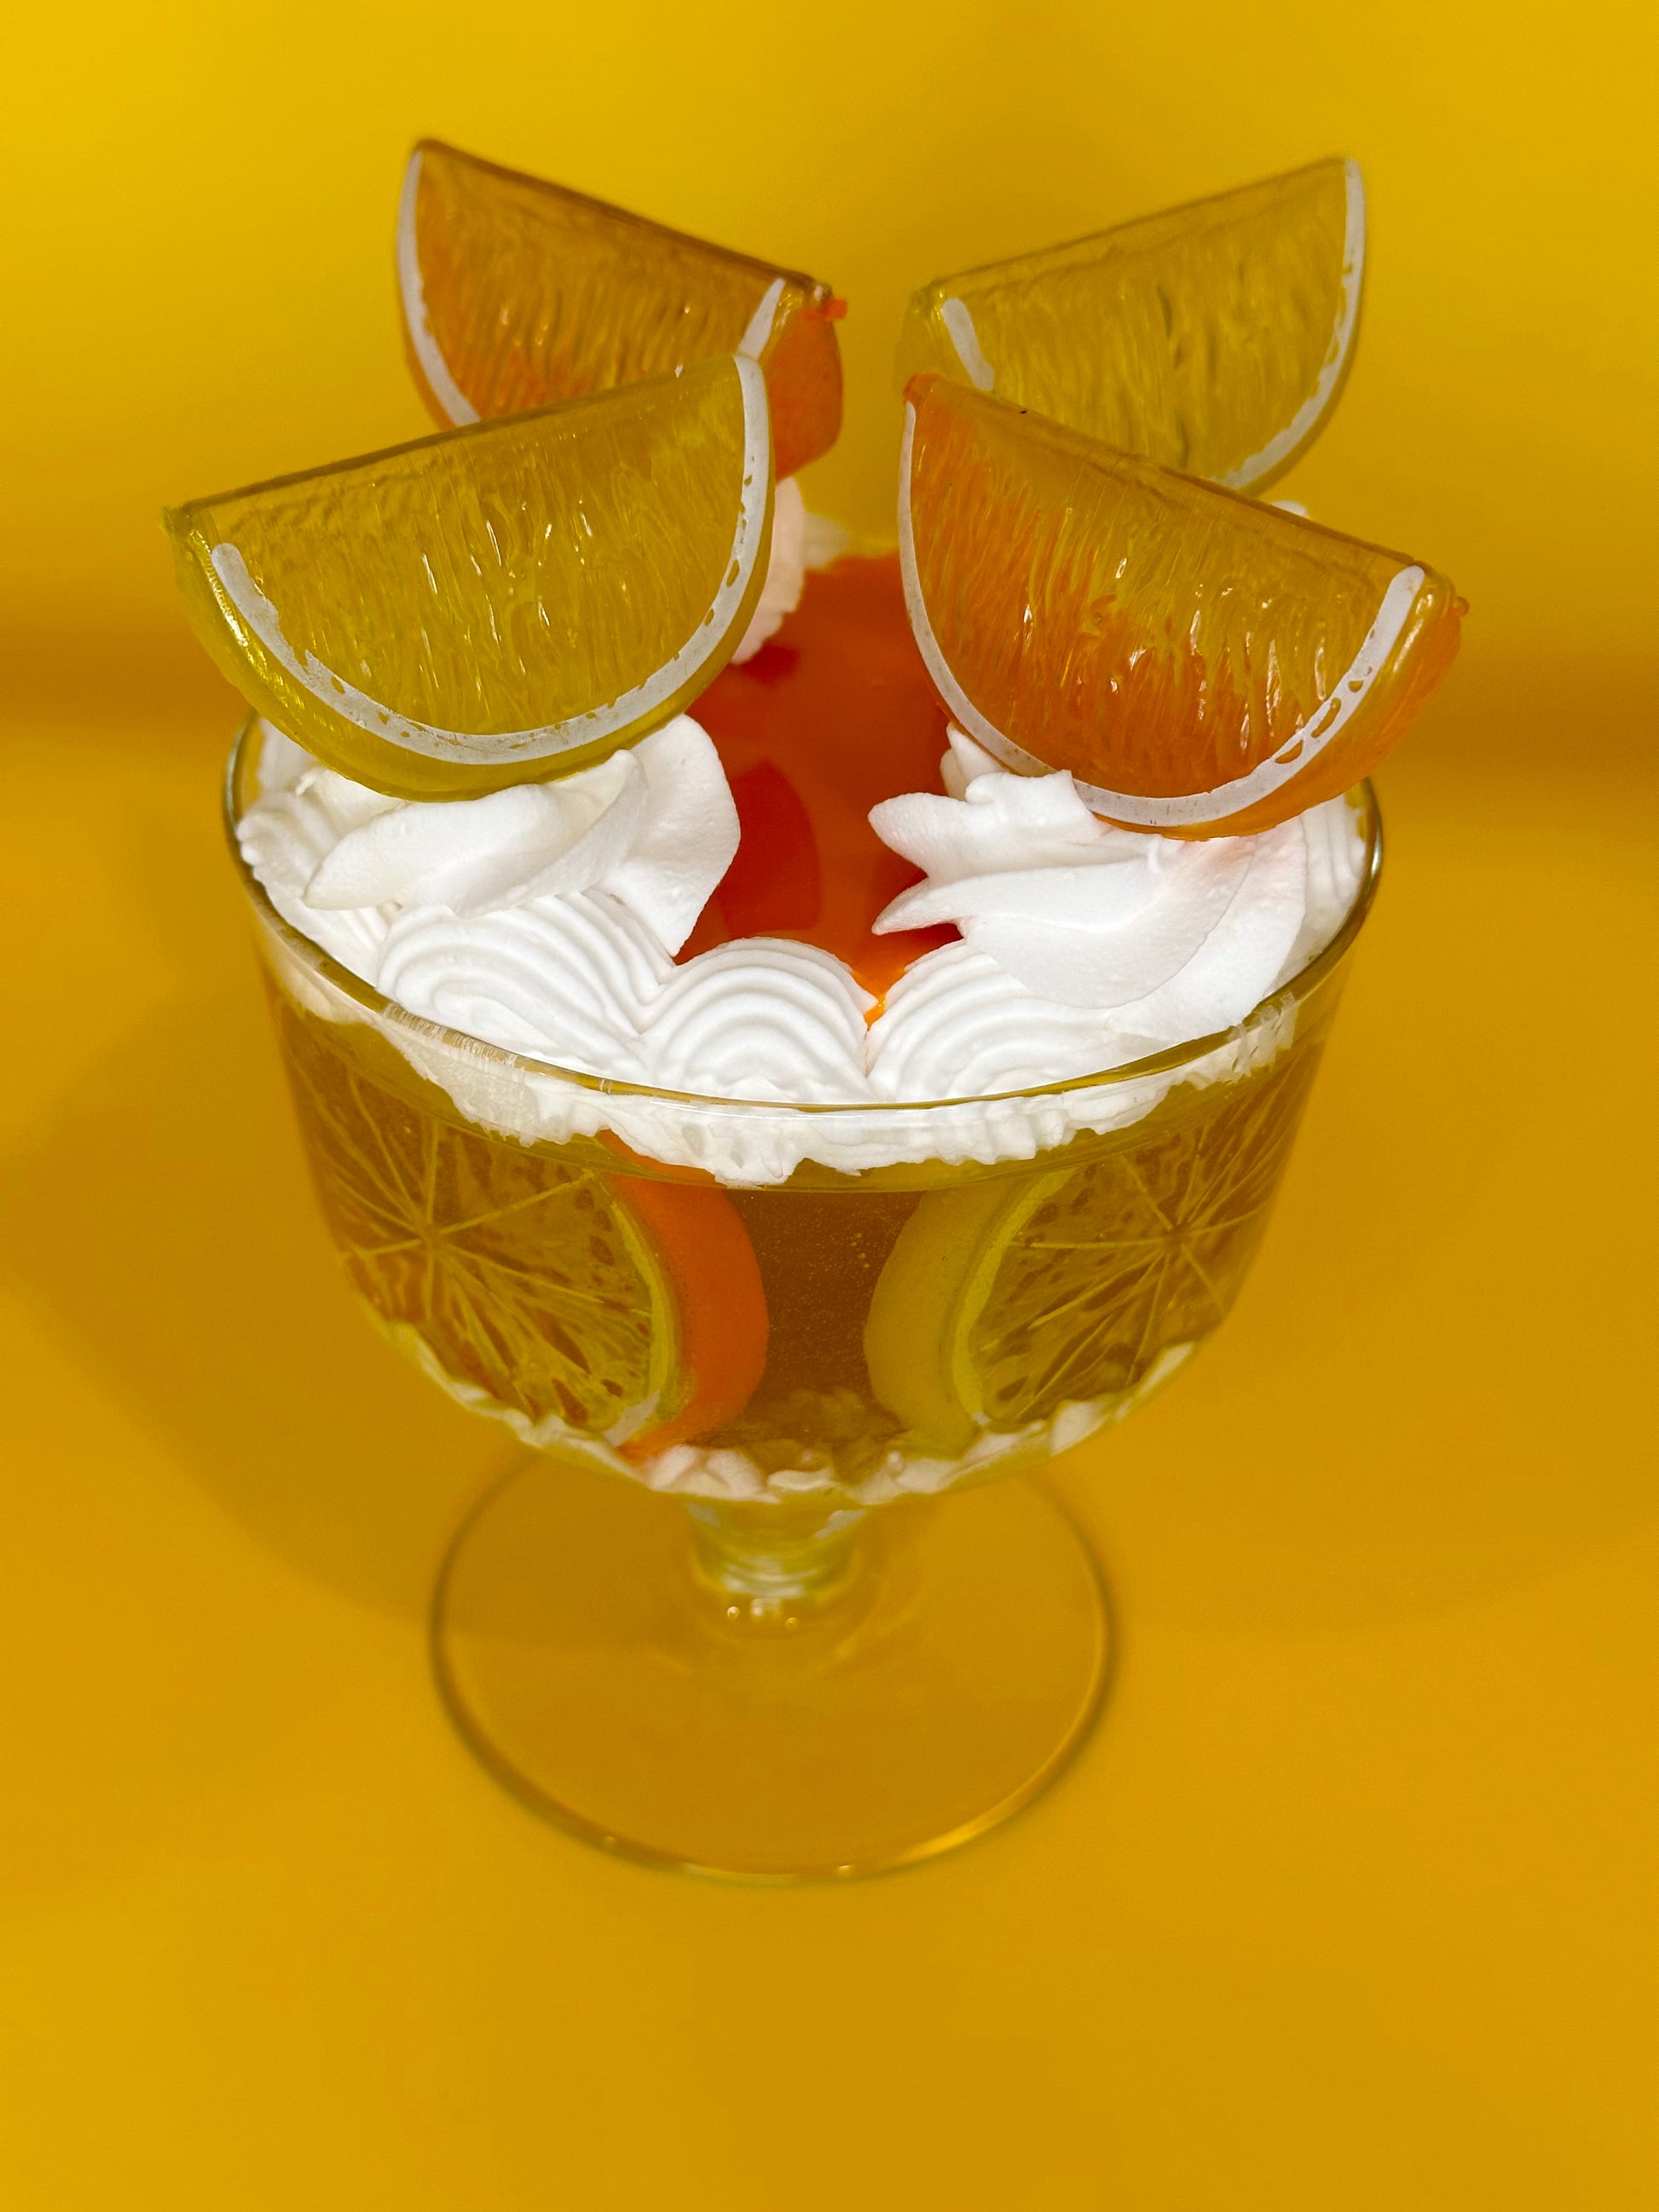 Lemon and Orange Jello in Glass Fruit on Top with Whip Cream and in a Vintage Glass Dish